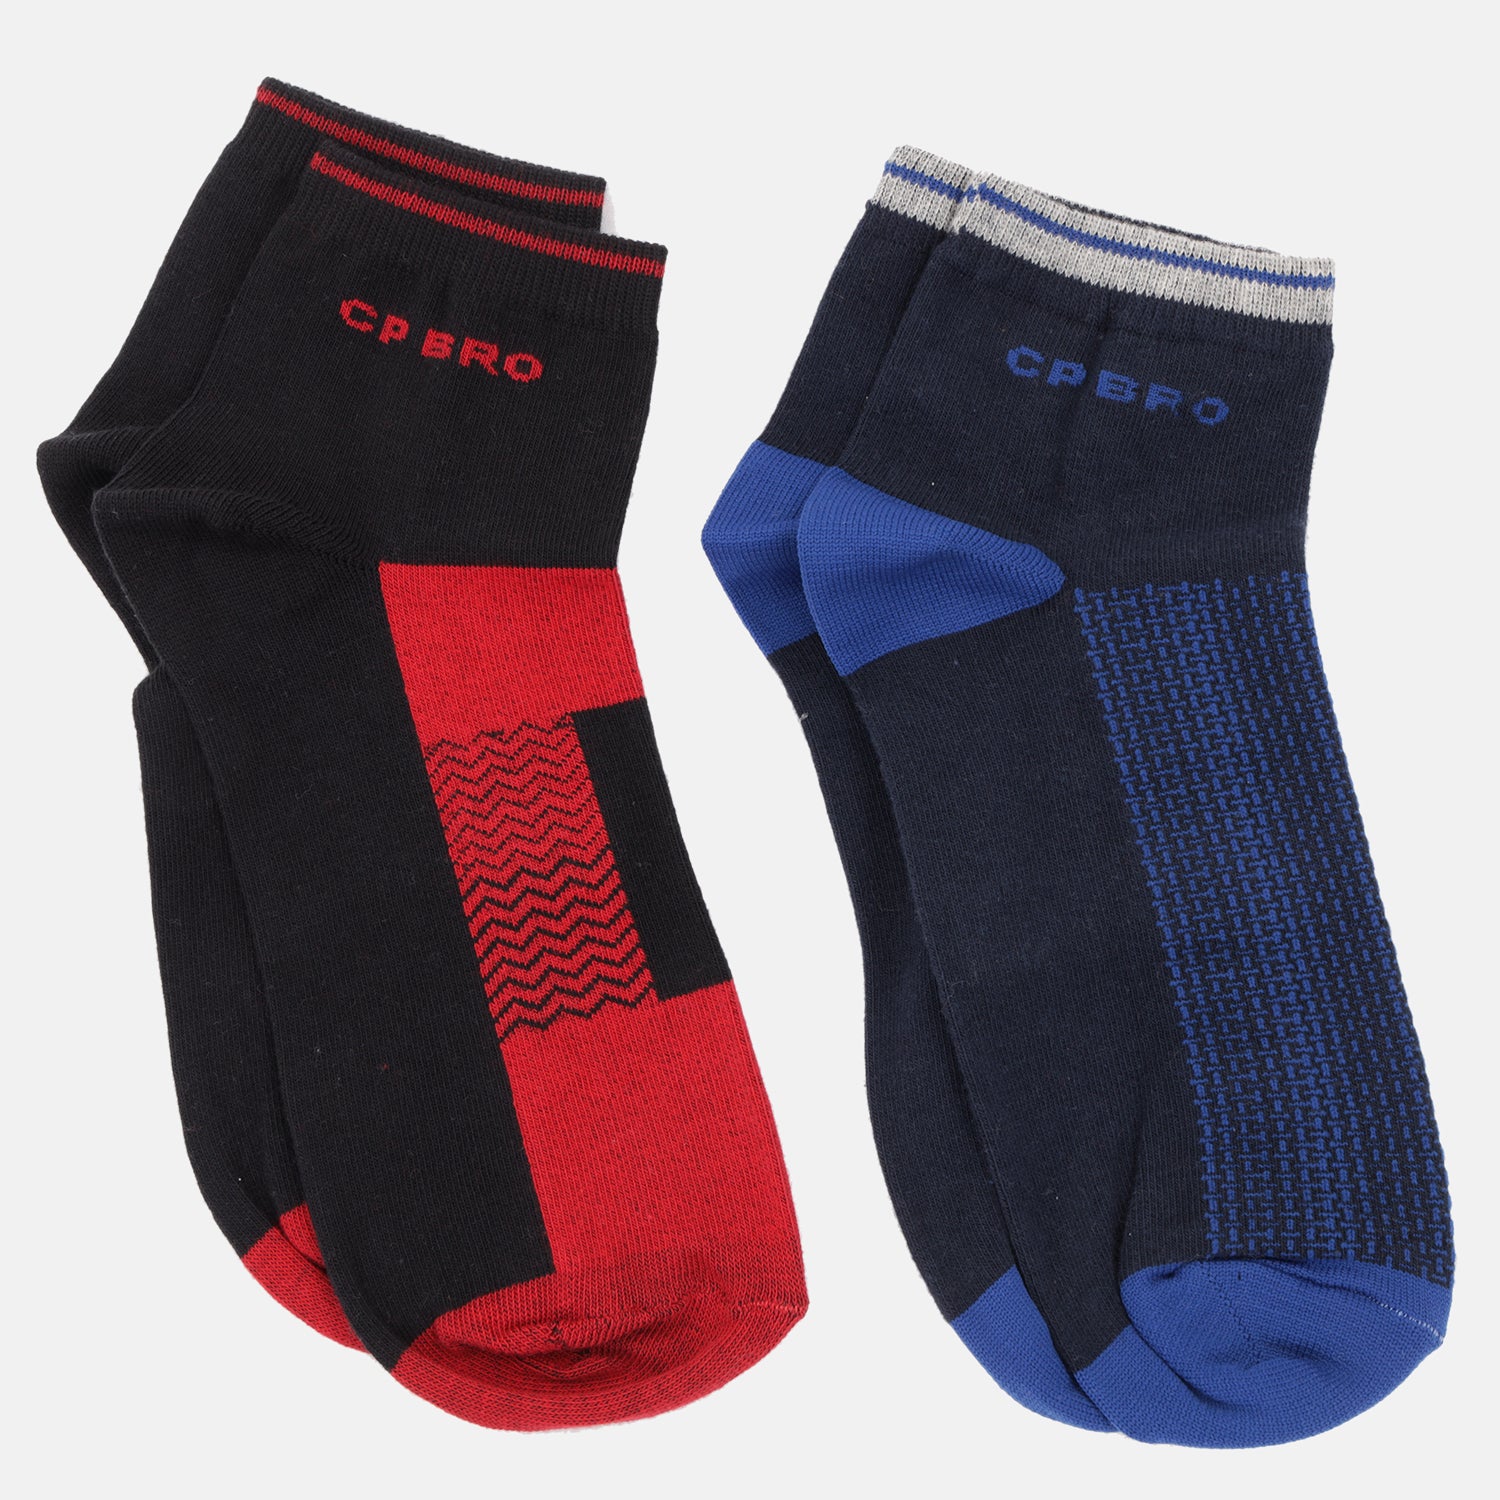 CP BRO Men's Cotton Ankle Socks - Pack of 2 - Red & Blue | B-SKS-A-REDBLU